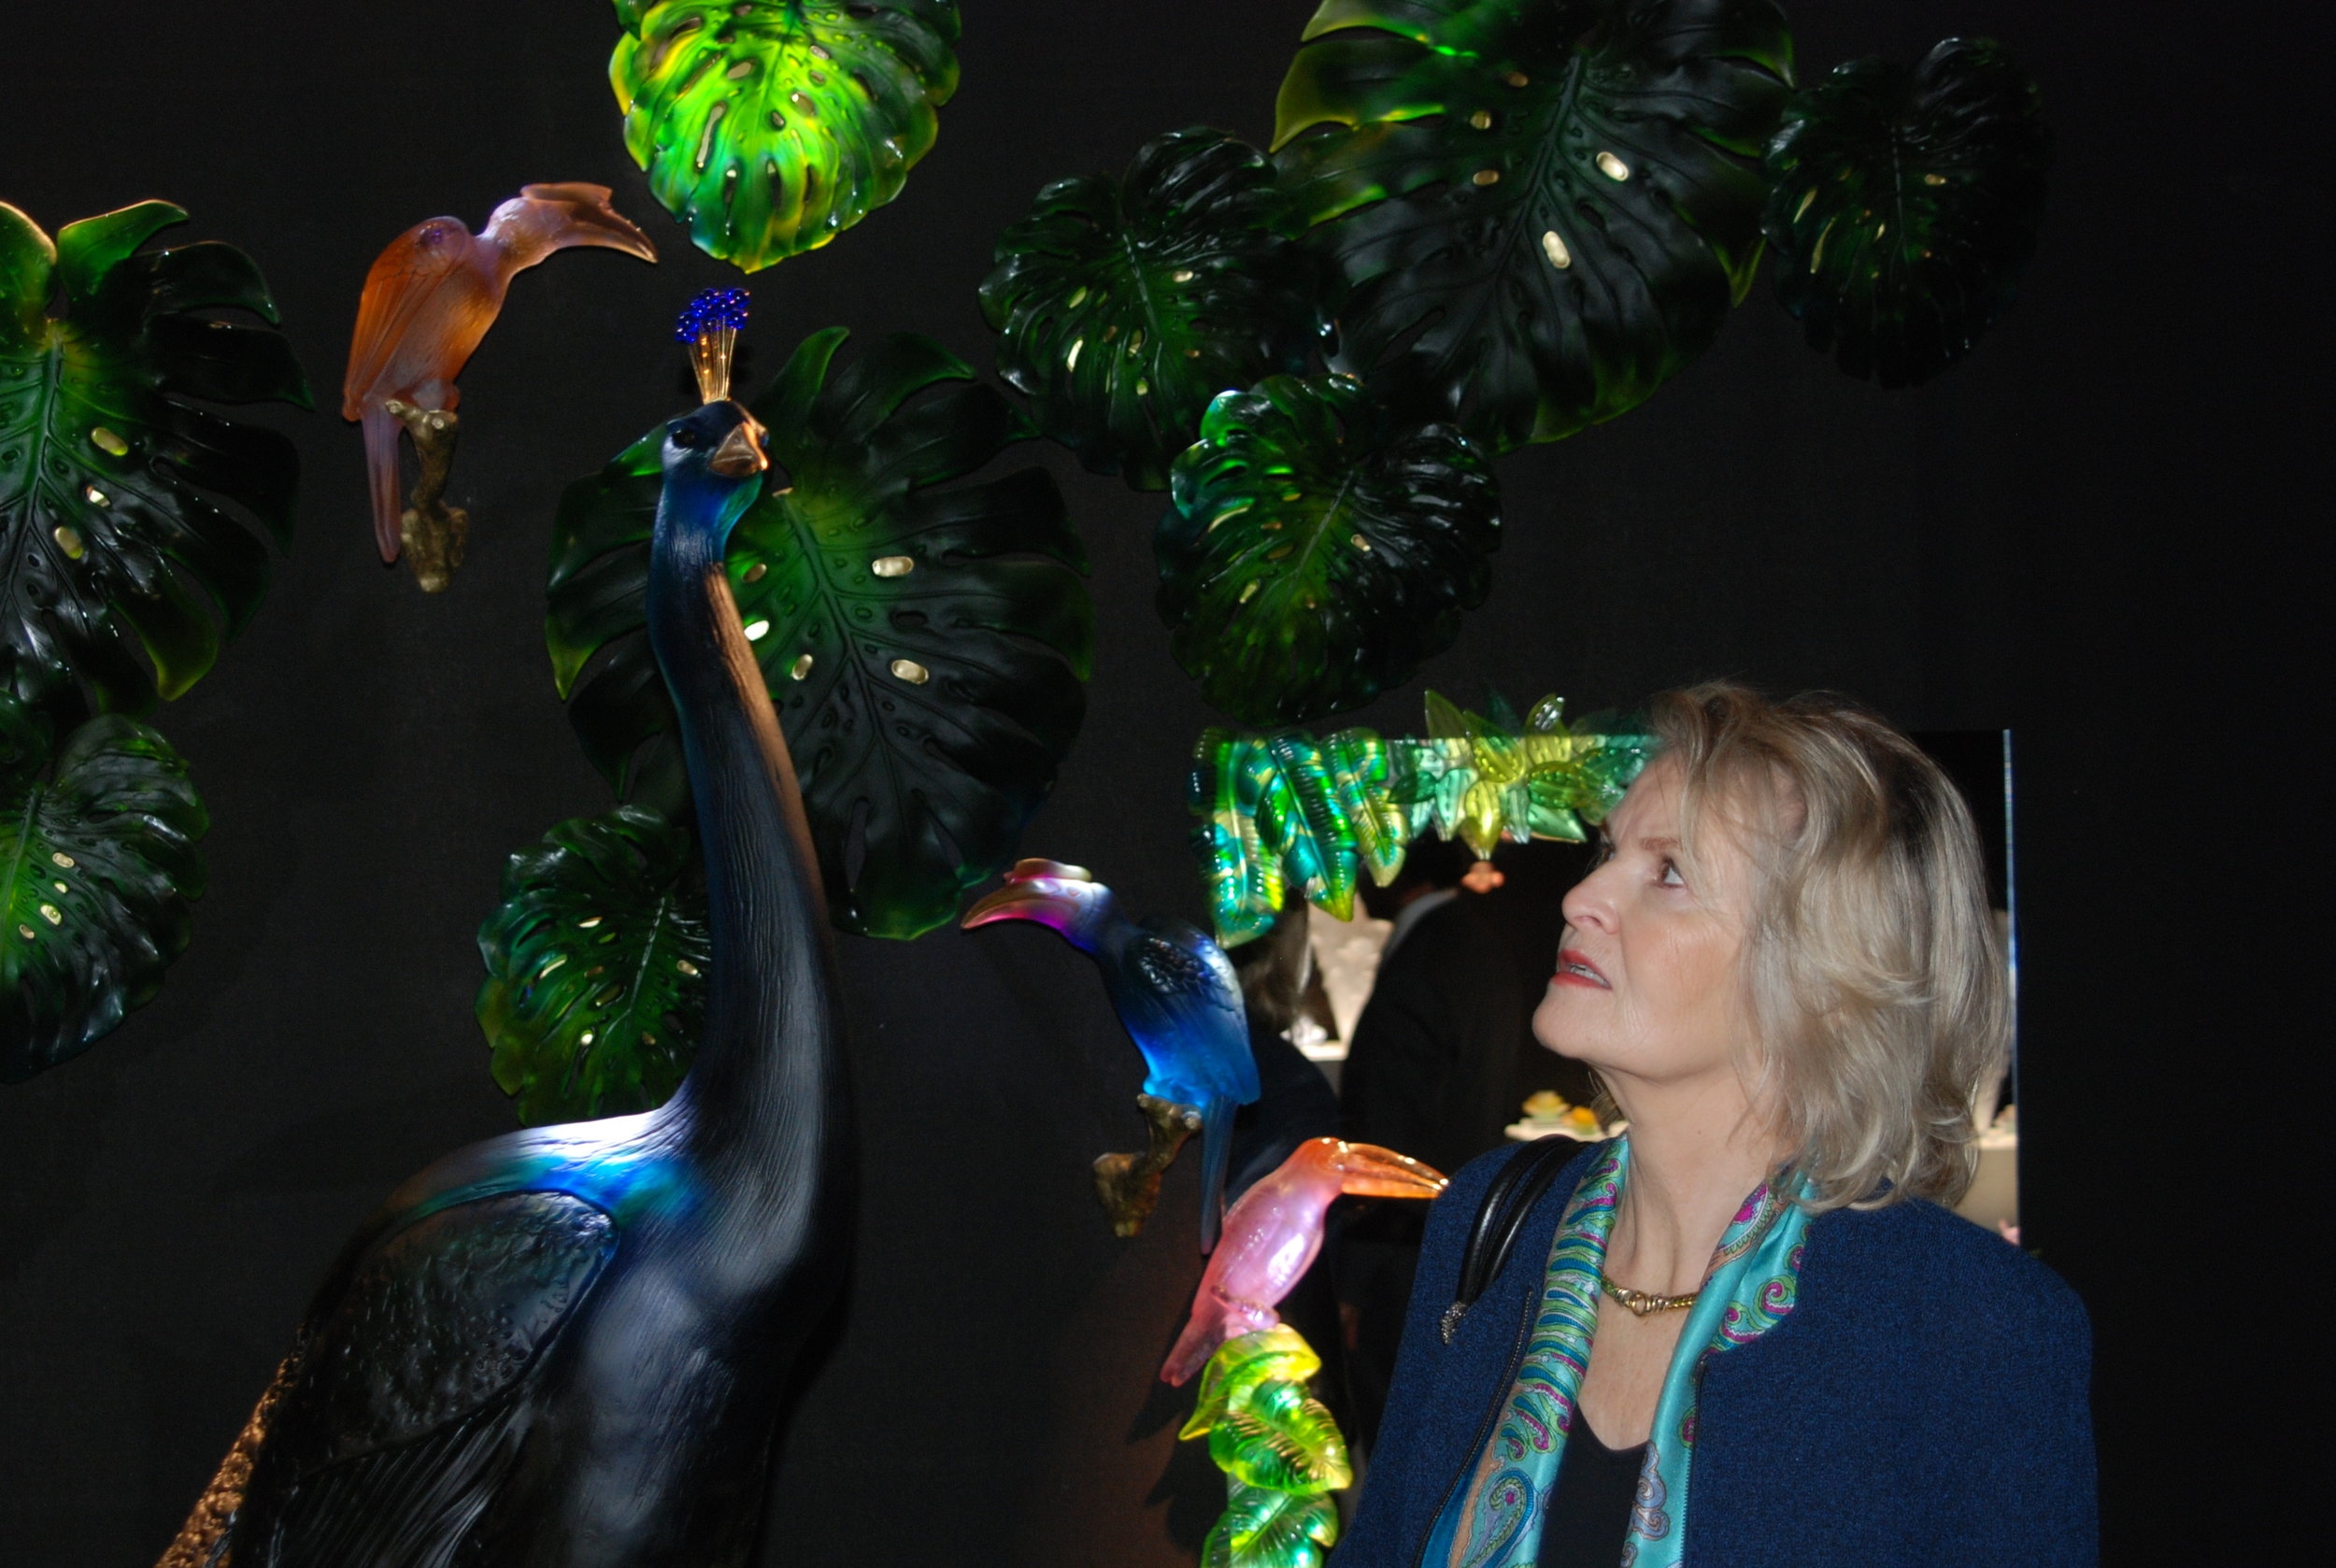  presentation of the peacock by Daum at Maison et Objet 2014 